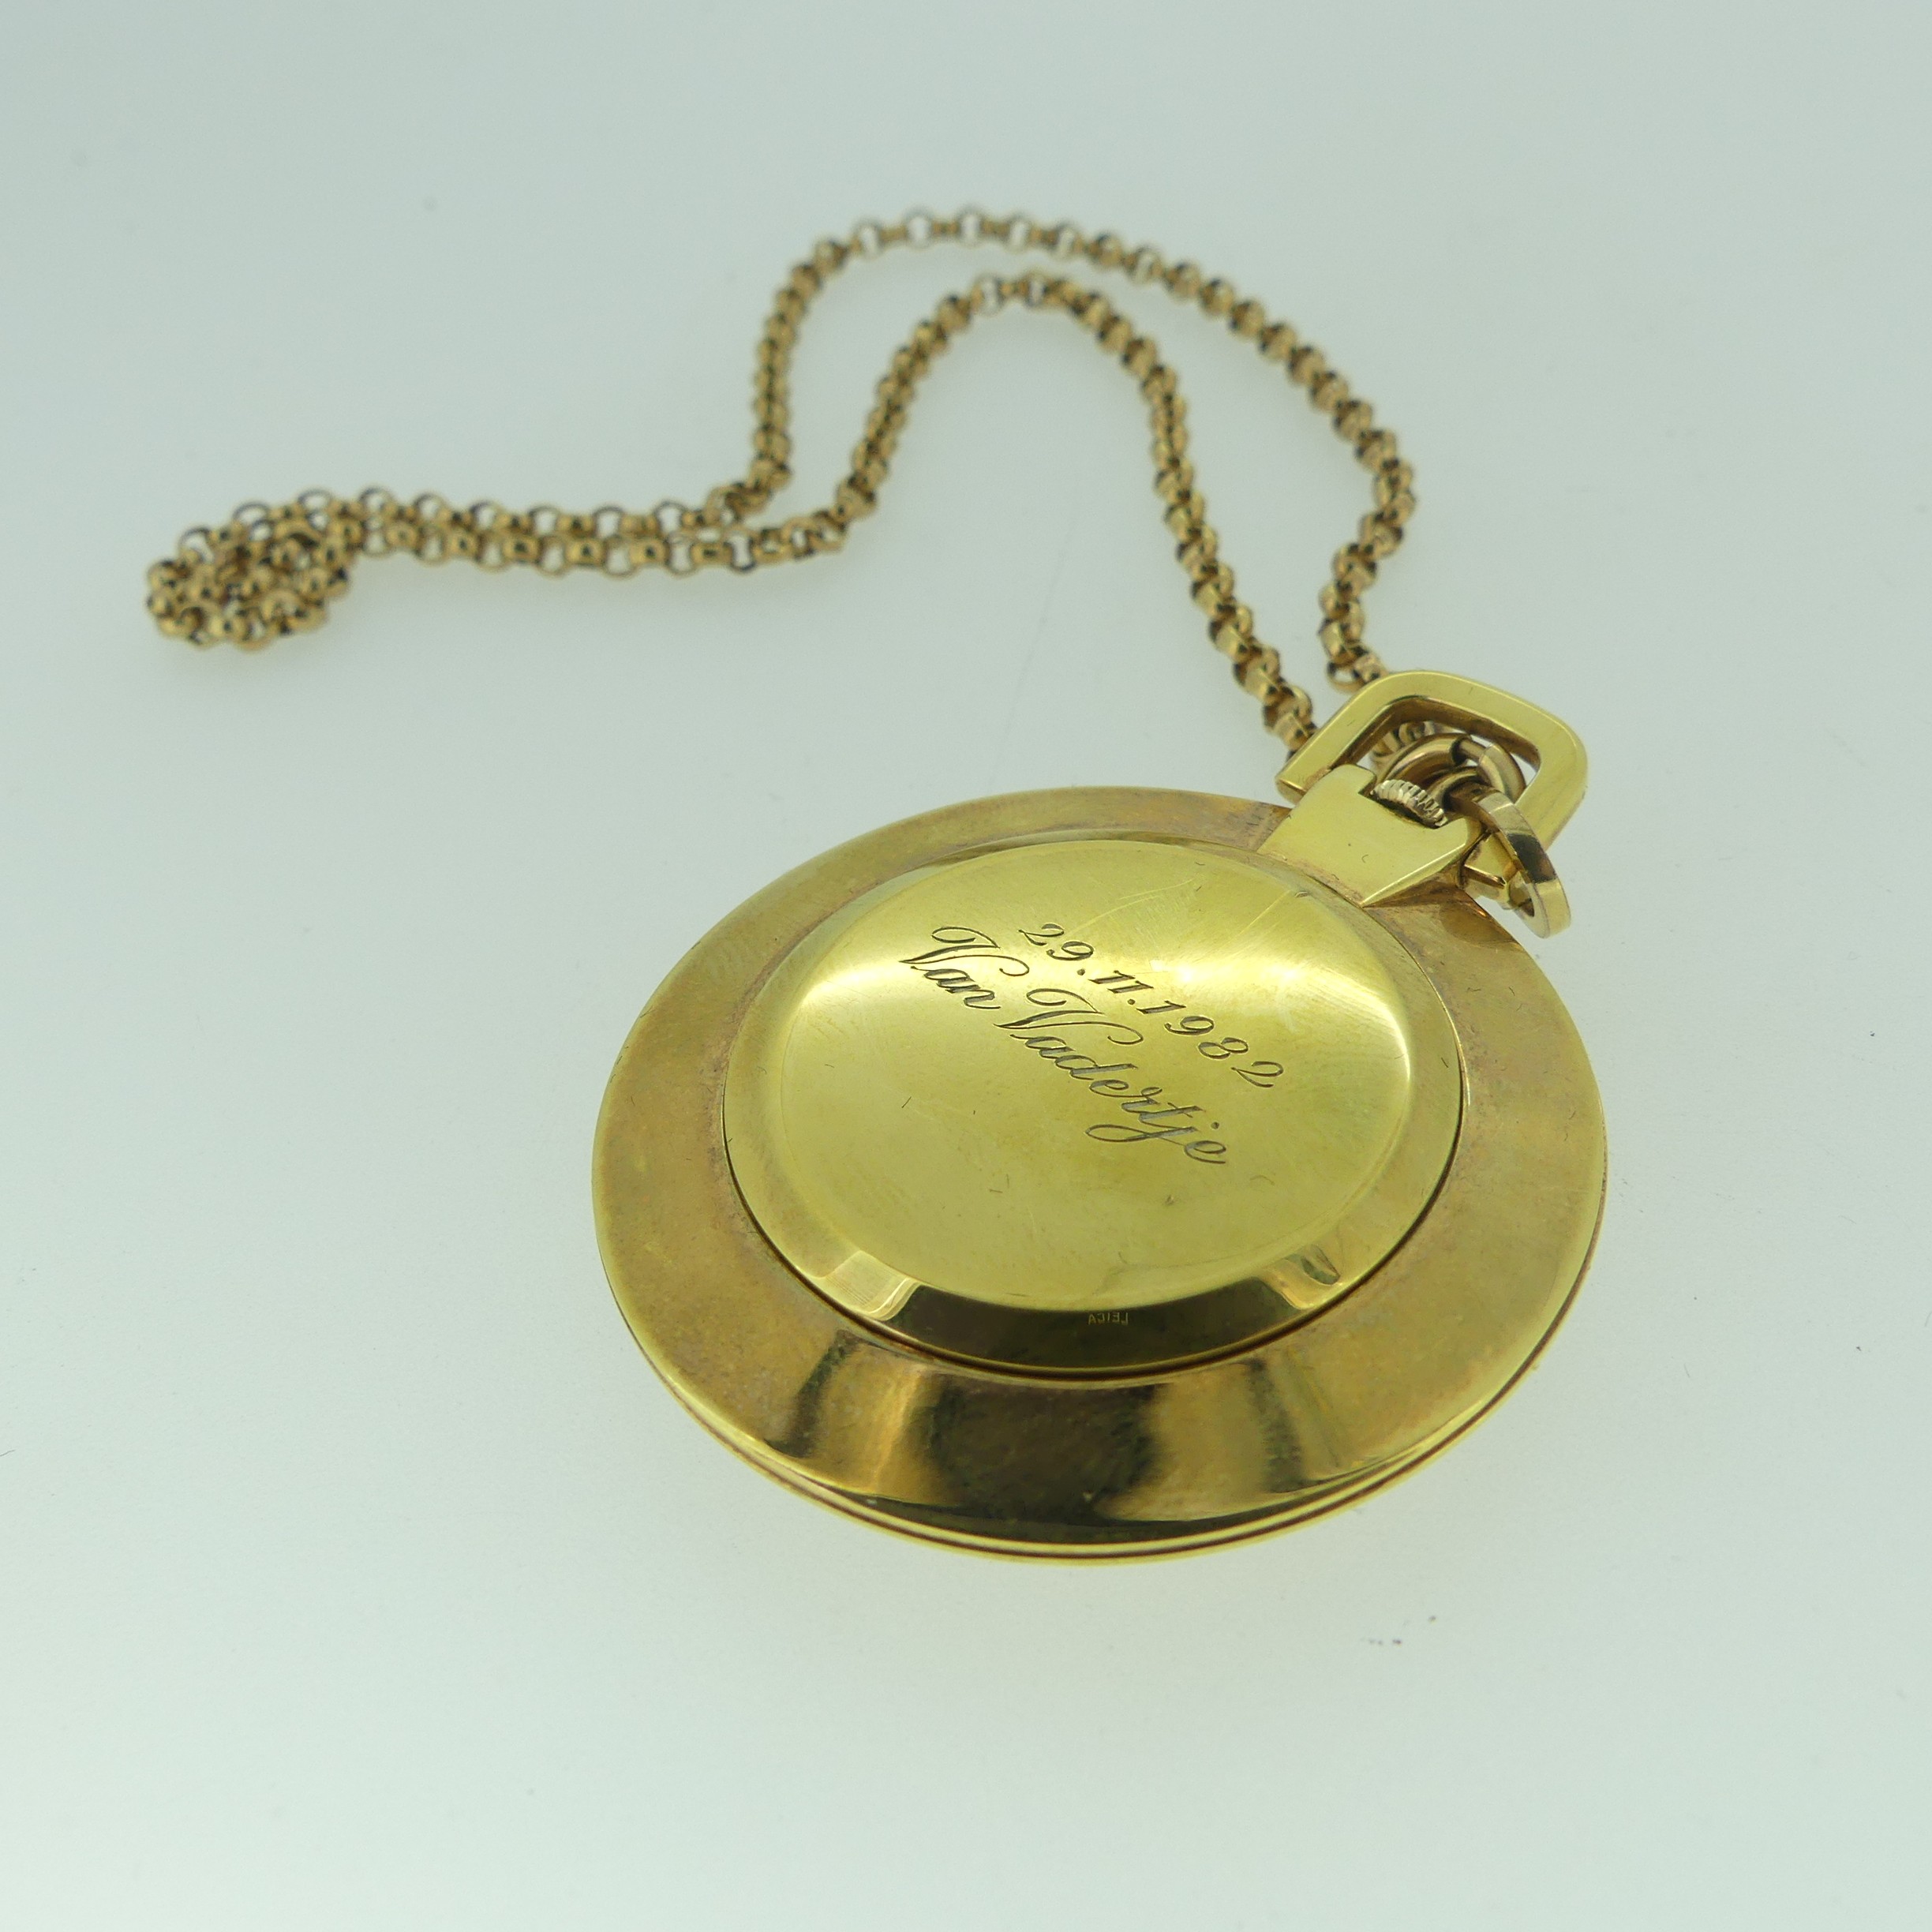 A Tissot Stylist gold-plated open-face Pocket Watch, with gilt dial and baton markers, 40mm - Image 2 of 3